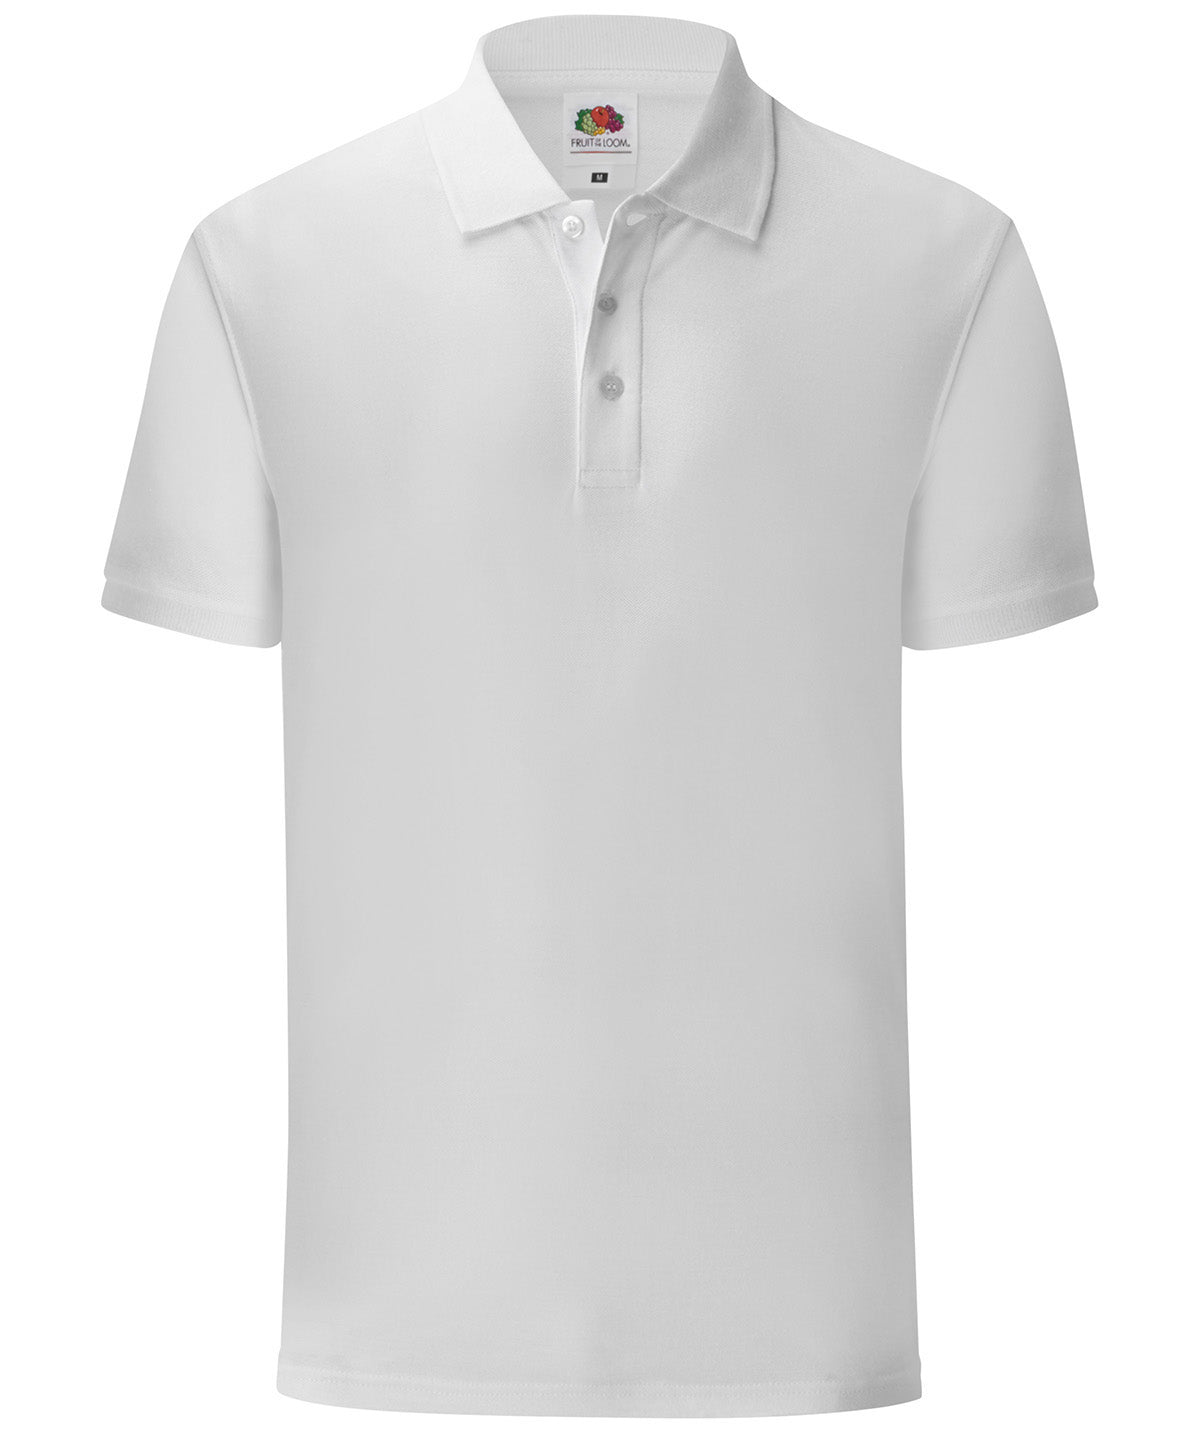 Personalised Polo Shirts - Silver Fruit of the Loom Iconic polo